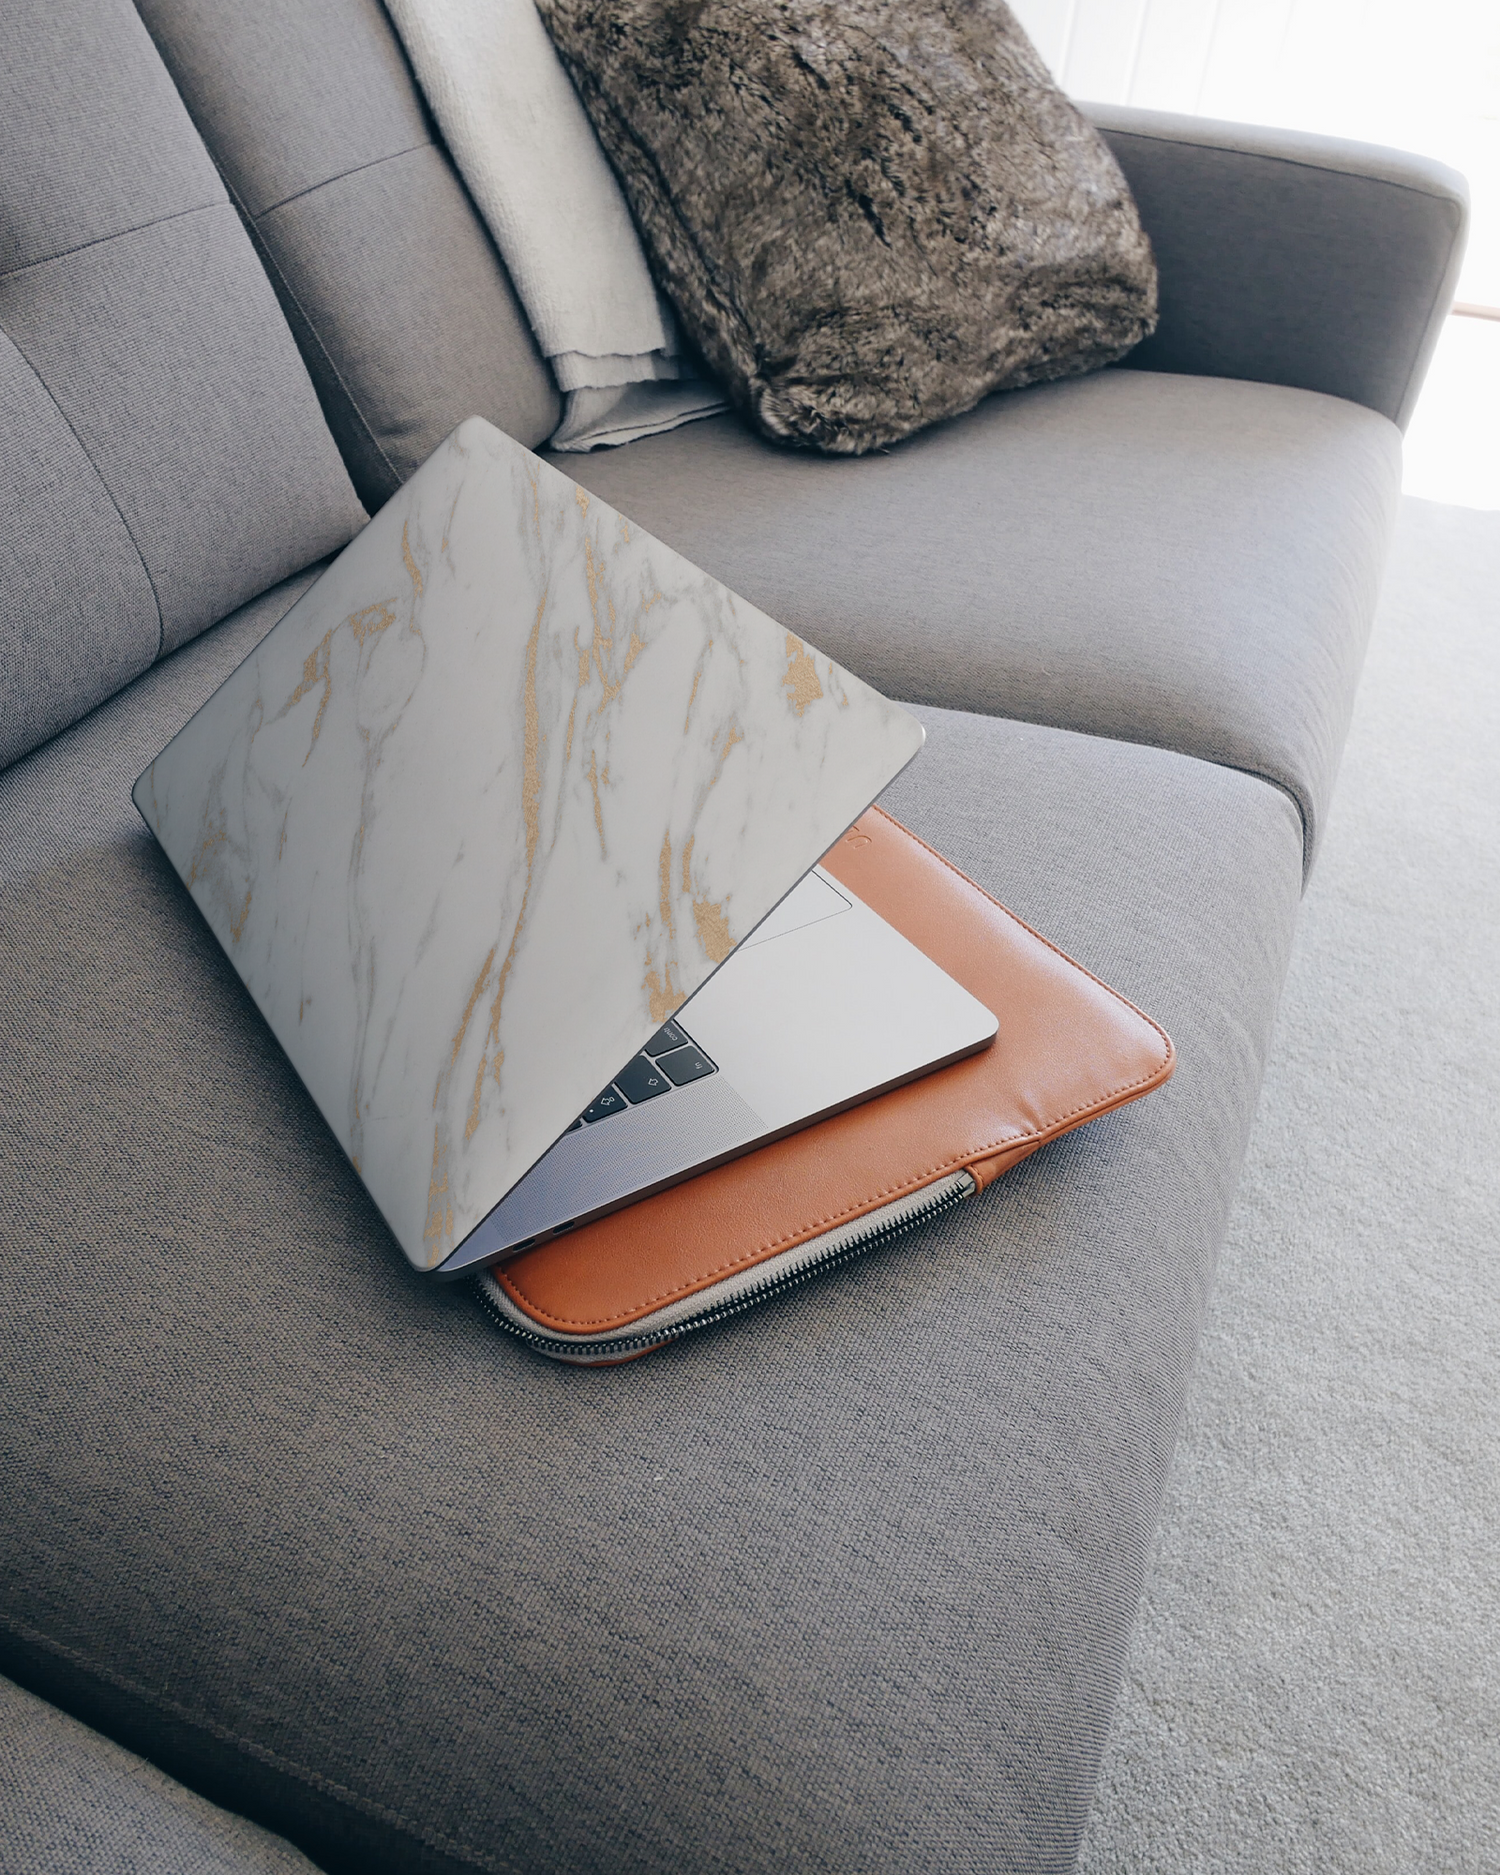 Gold Marble Elegance Laptop Skin for 15 inch Apple MacBooks on a couch